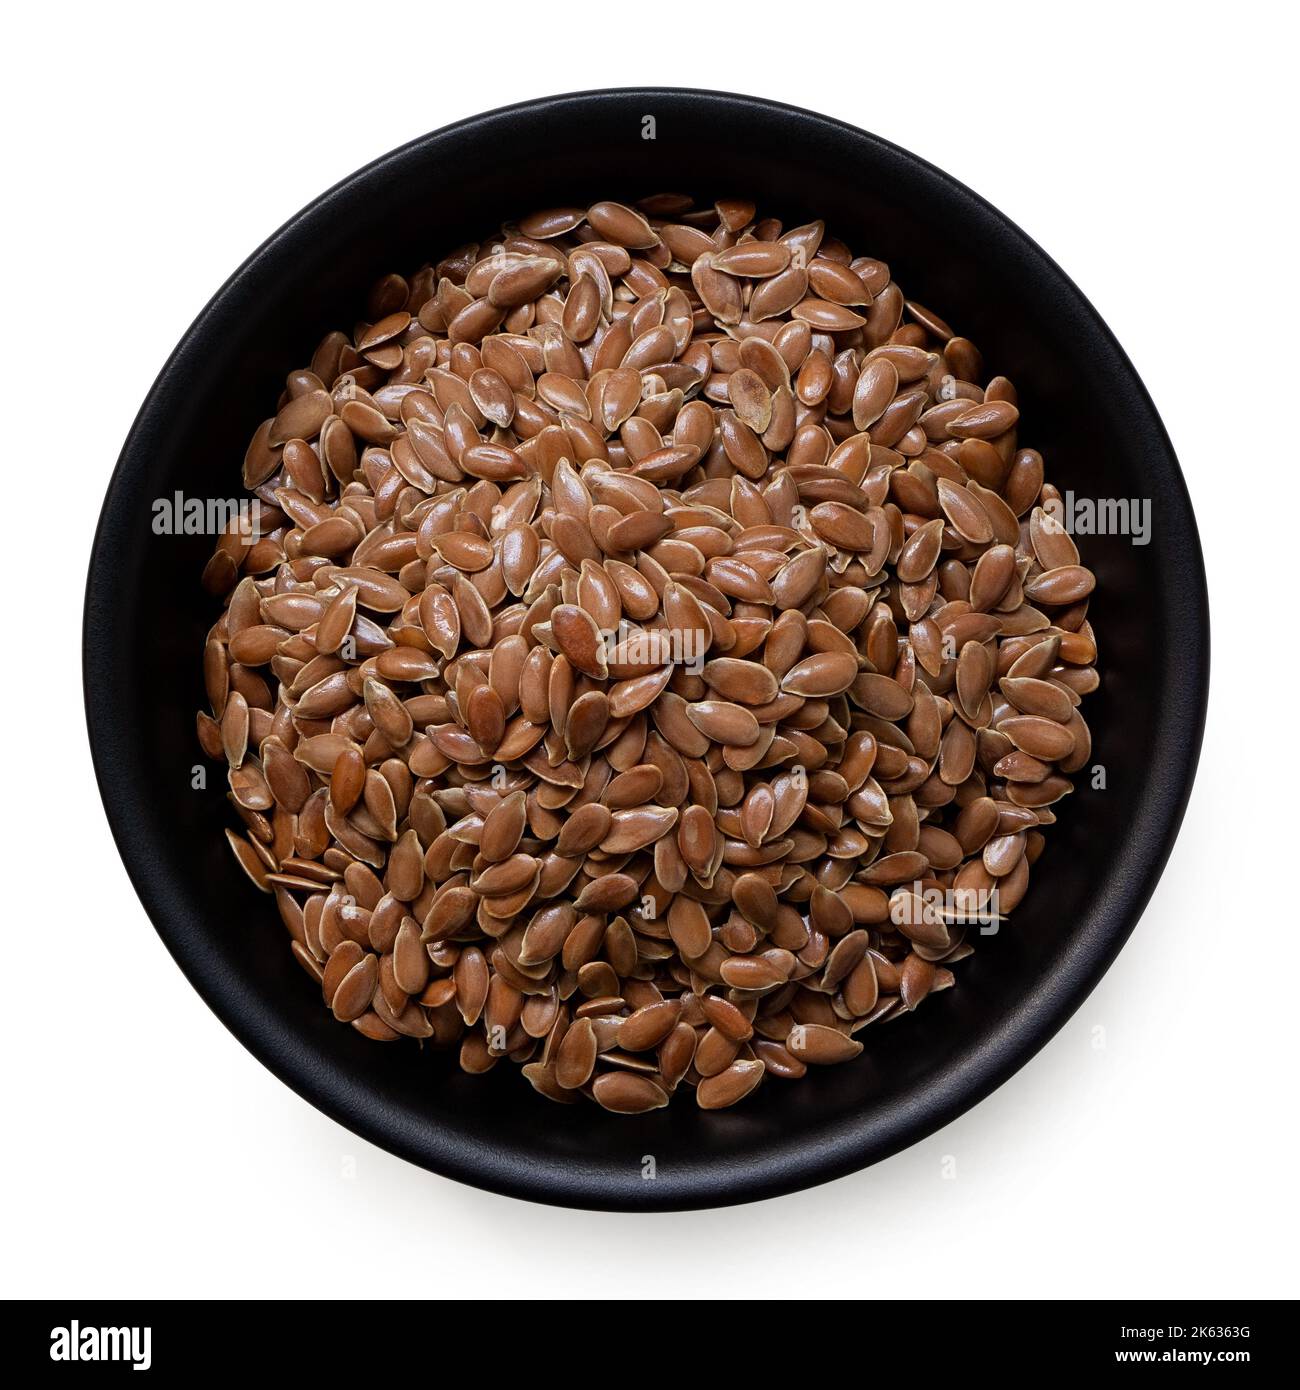 Flax seeds in a black ceramic bowl isolated on white. Top view. Stock Photo